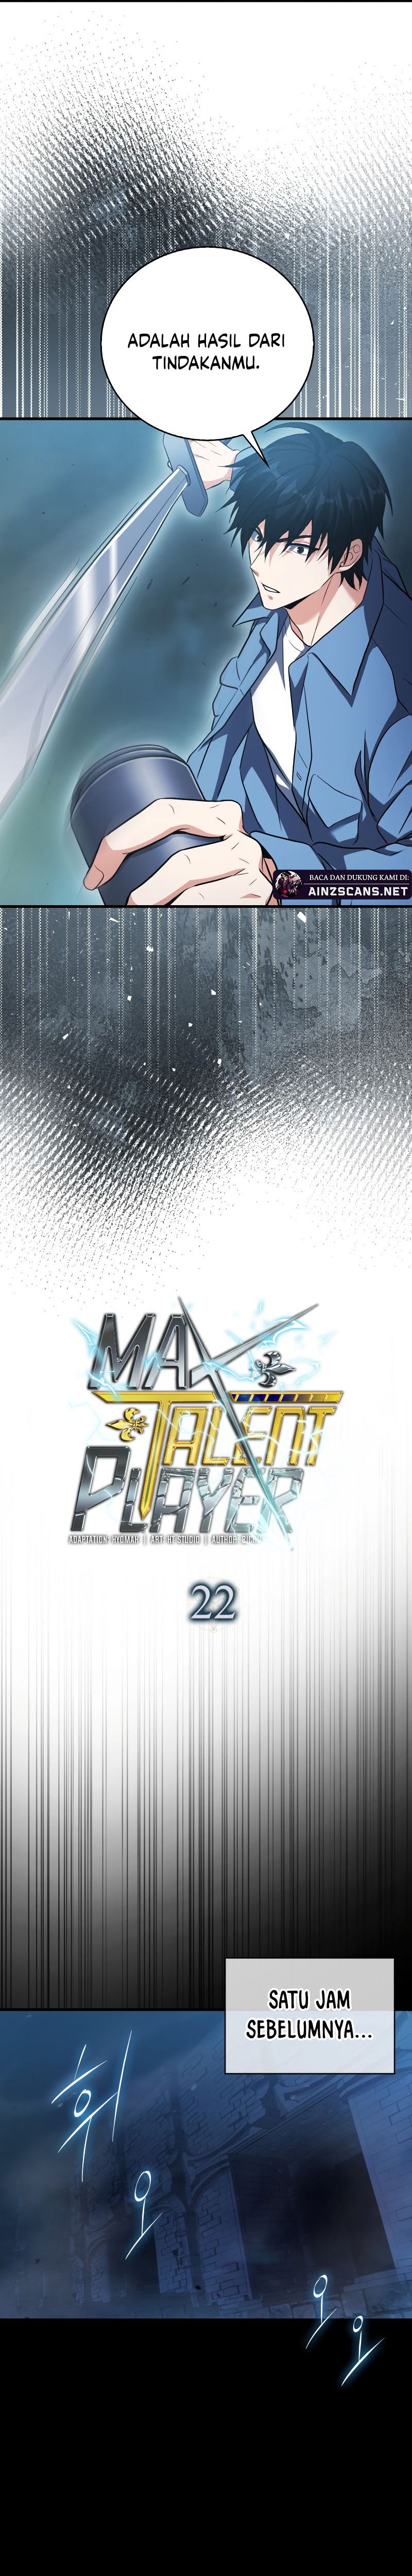 Max Talent Player Chapter 22